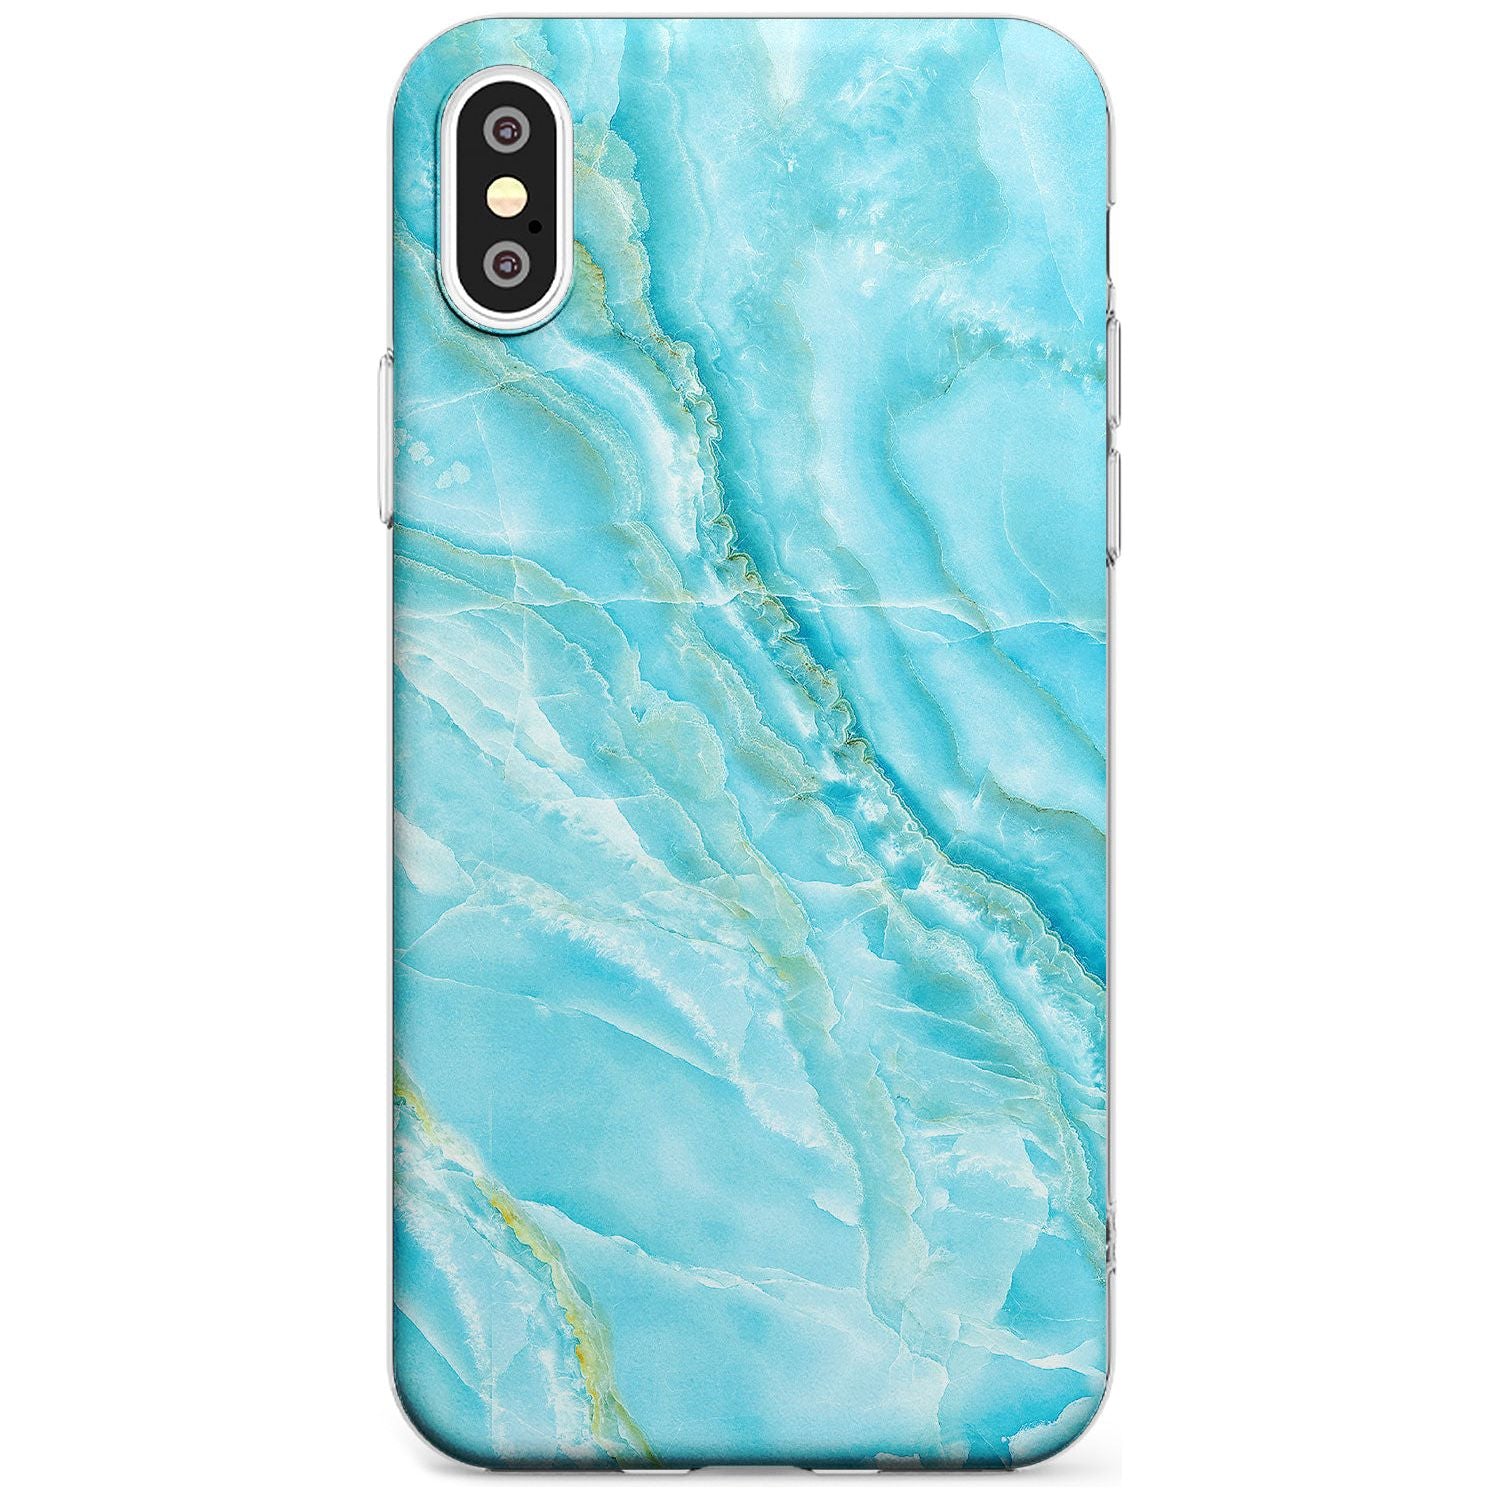 Bright Blue Onyx Marble Texture Black Impact Phone Case for iPhone X XS Max XR